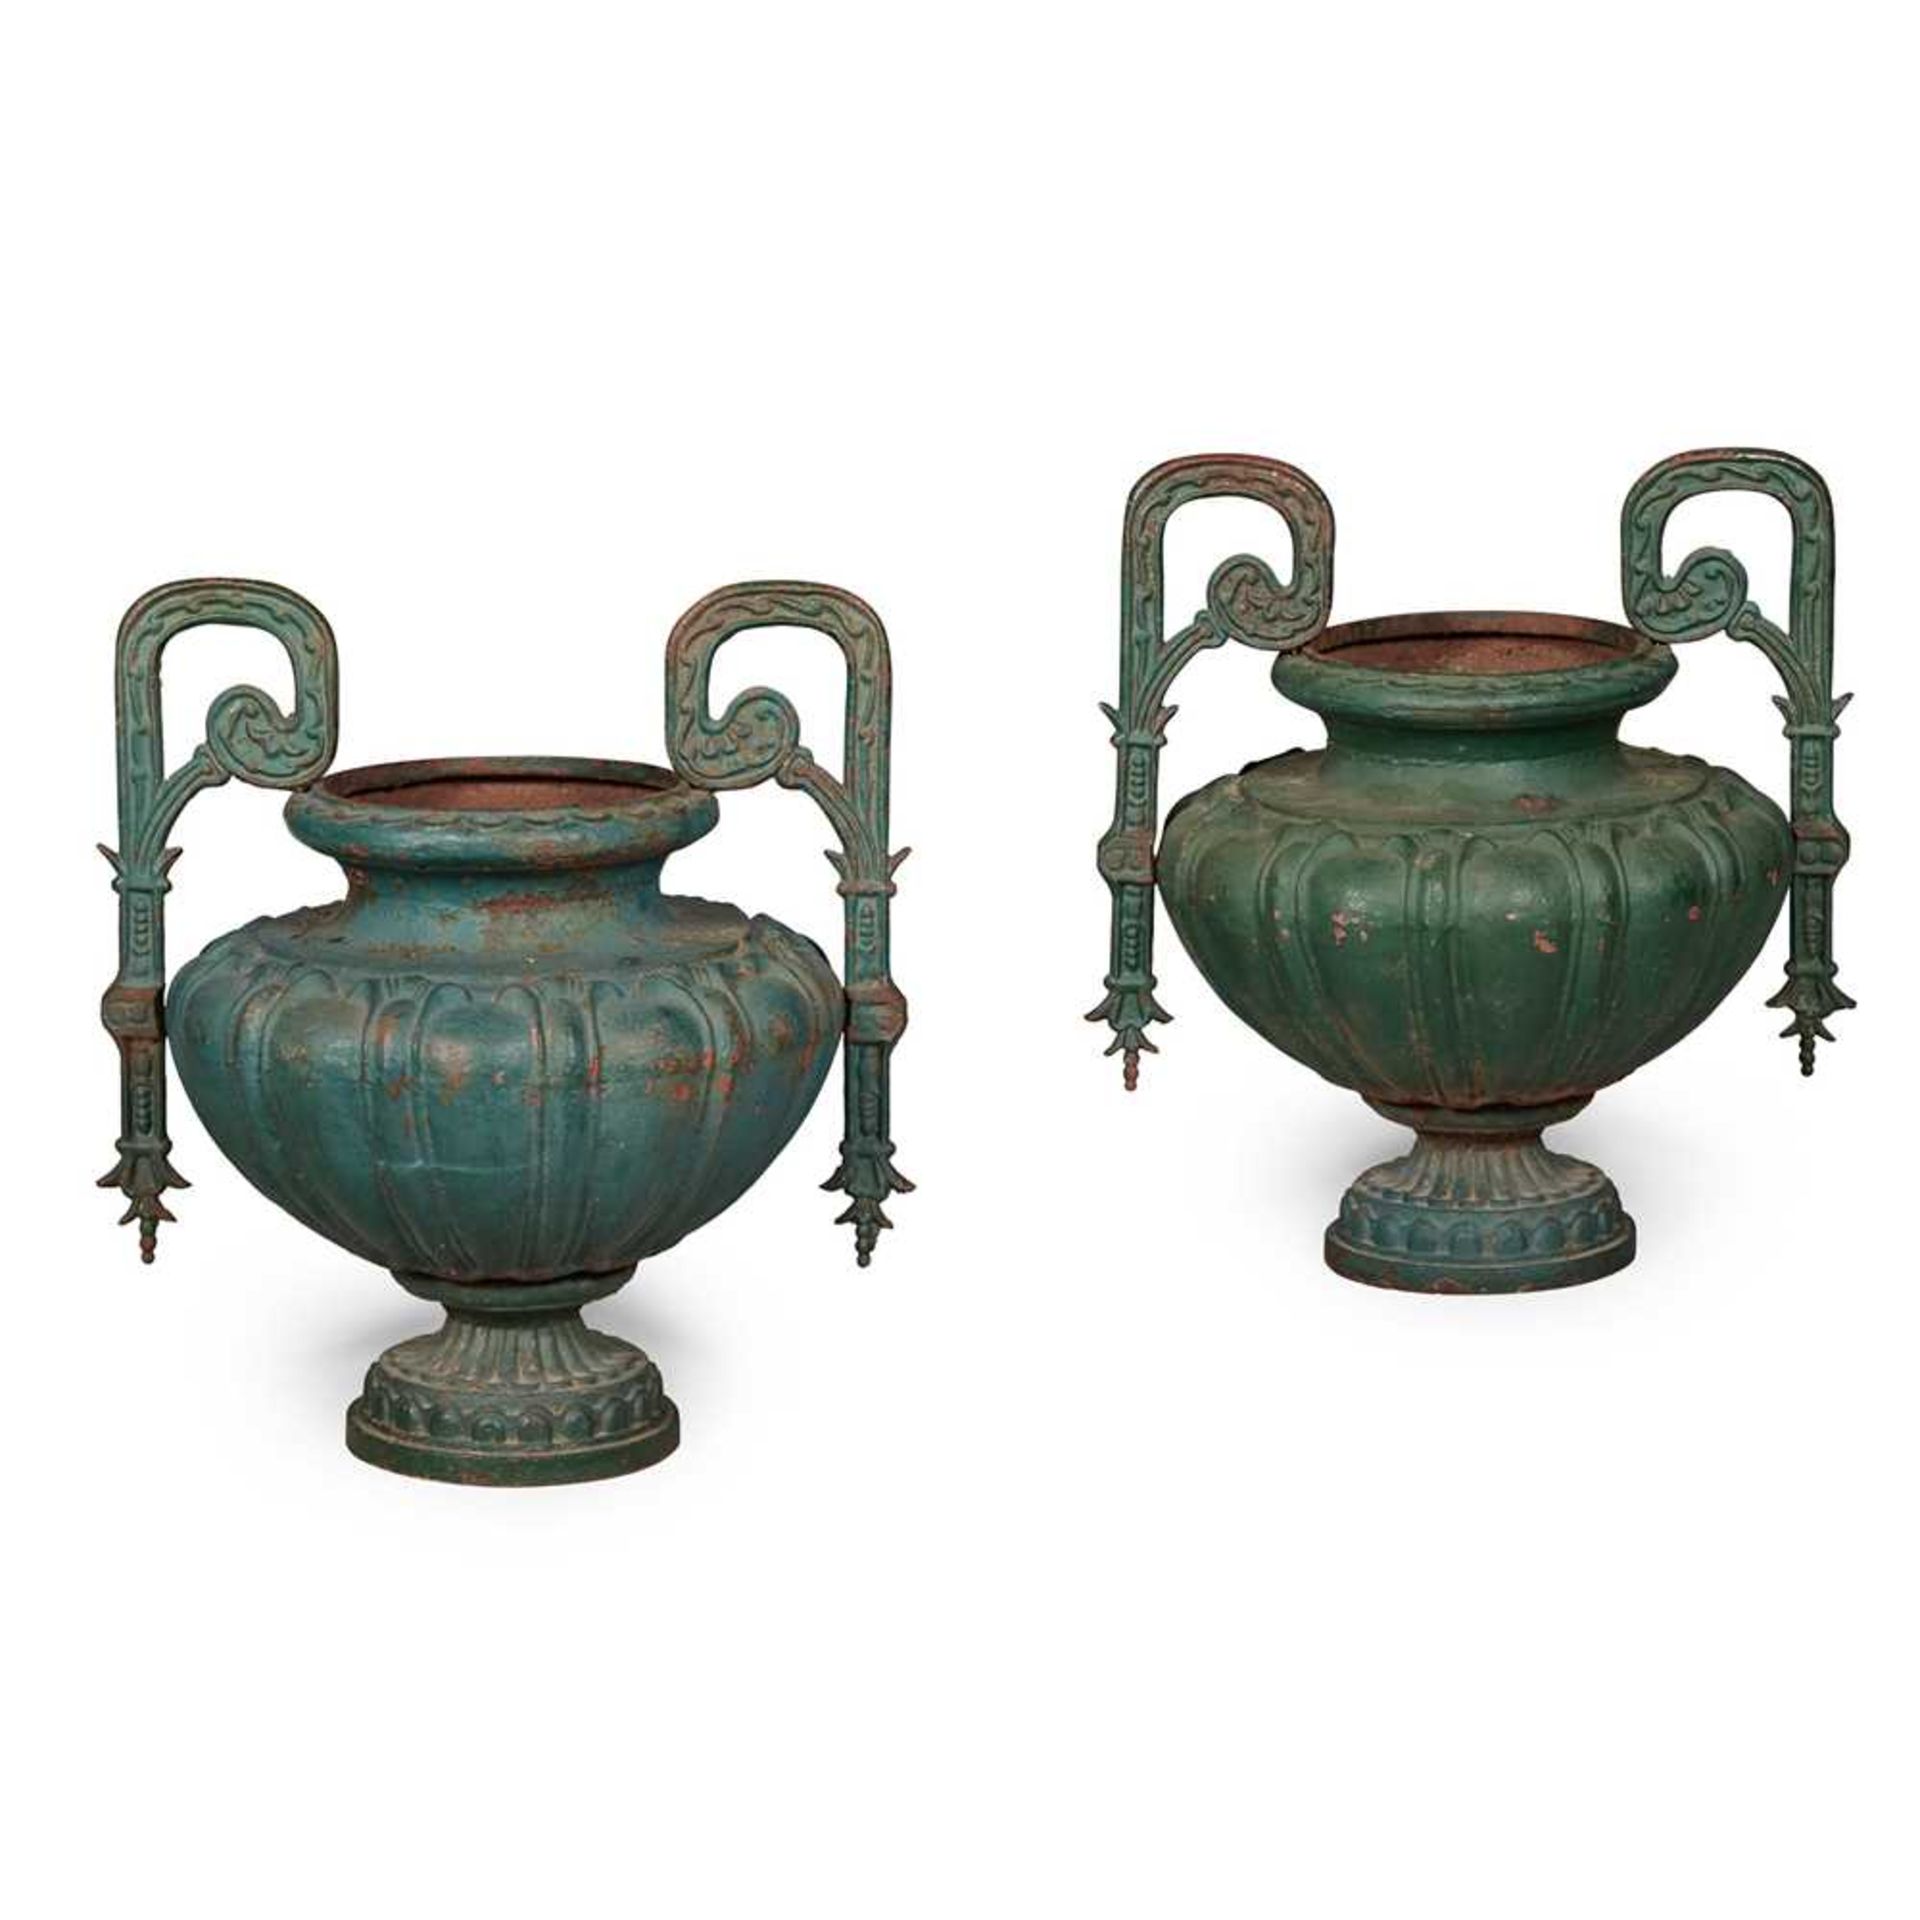 PAIR OF FRENCH CAST-IRON URNS 19TH CENTURY